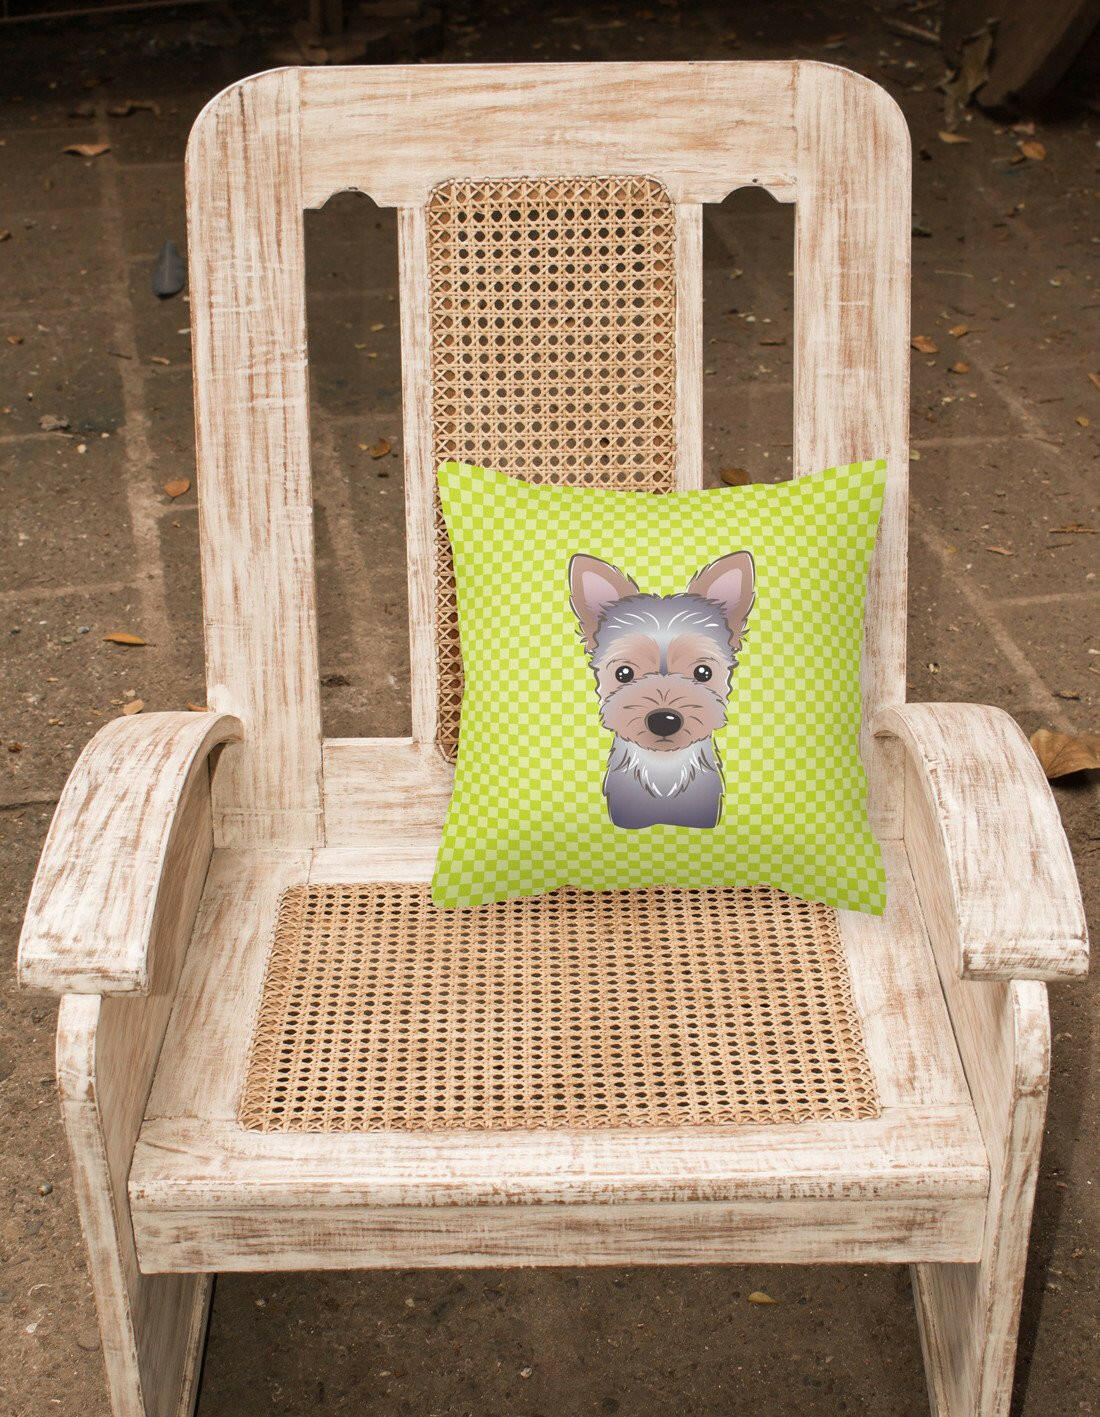 Checkerboard Lime Green Yorkie Puppy Canvas Fabric Decorative Pillow BB1294PW1414 - the-store.com